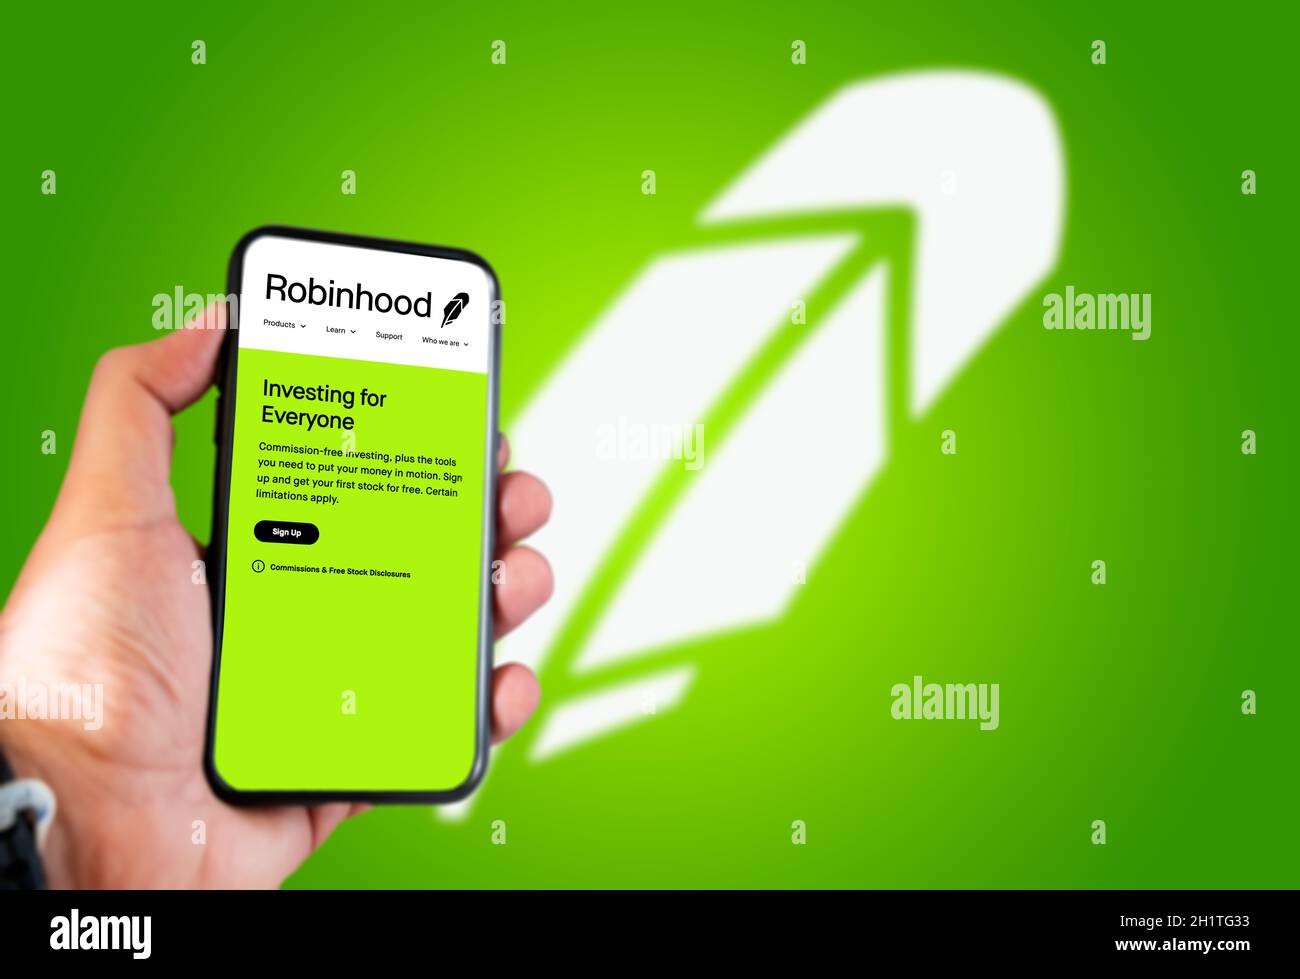 Menlo Park, CA, USA, April 2021: hand holds a smartphone with the Robinhood logo on the screen. Green background with blurred logo. Robinhood is a fin Stock Photo